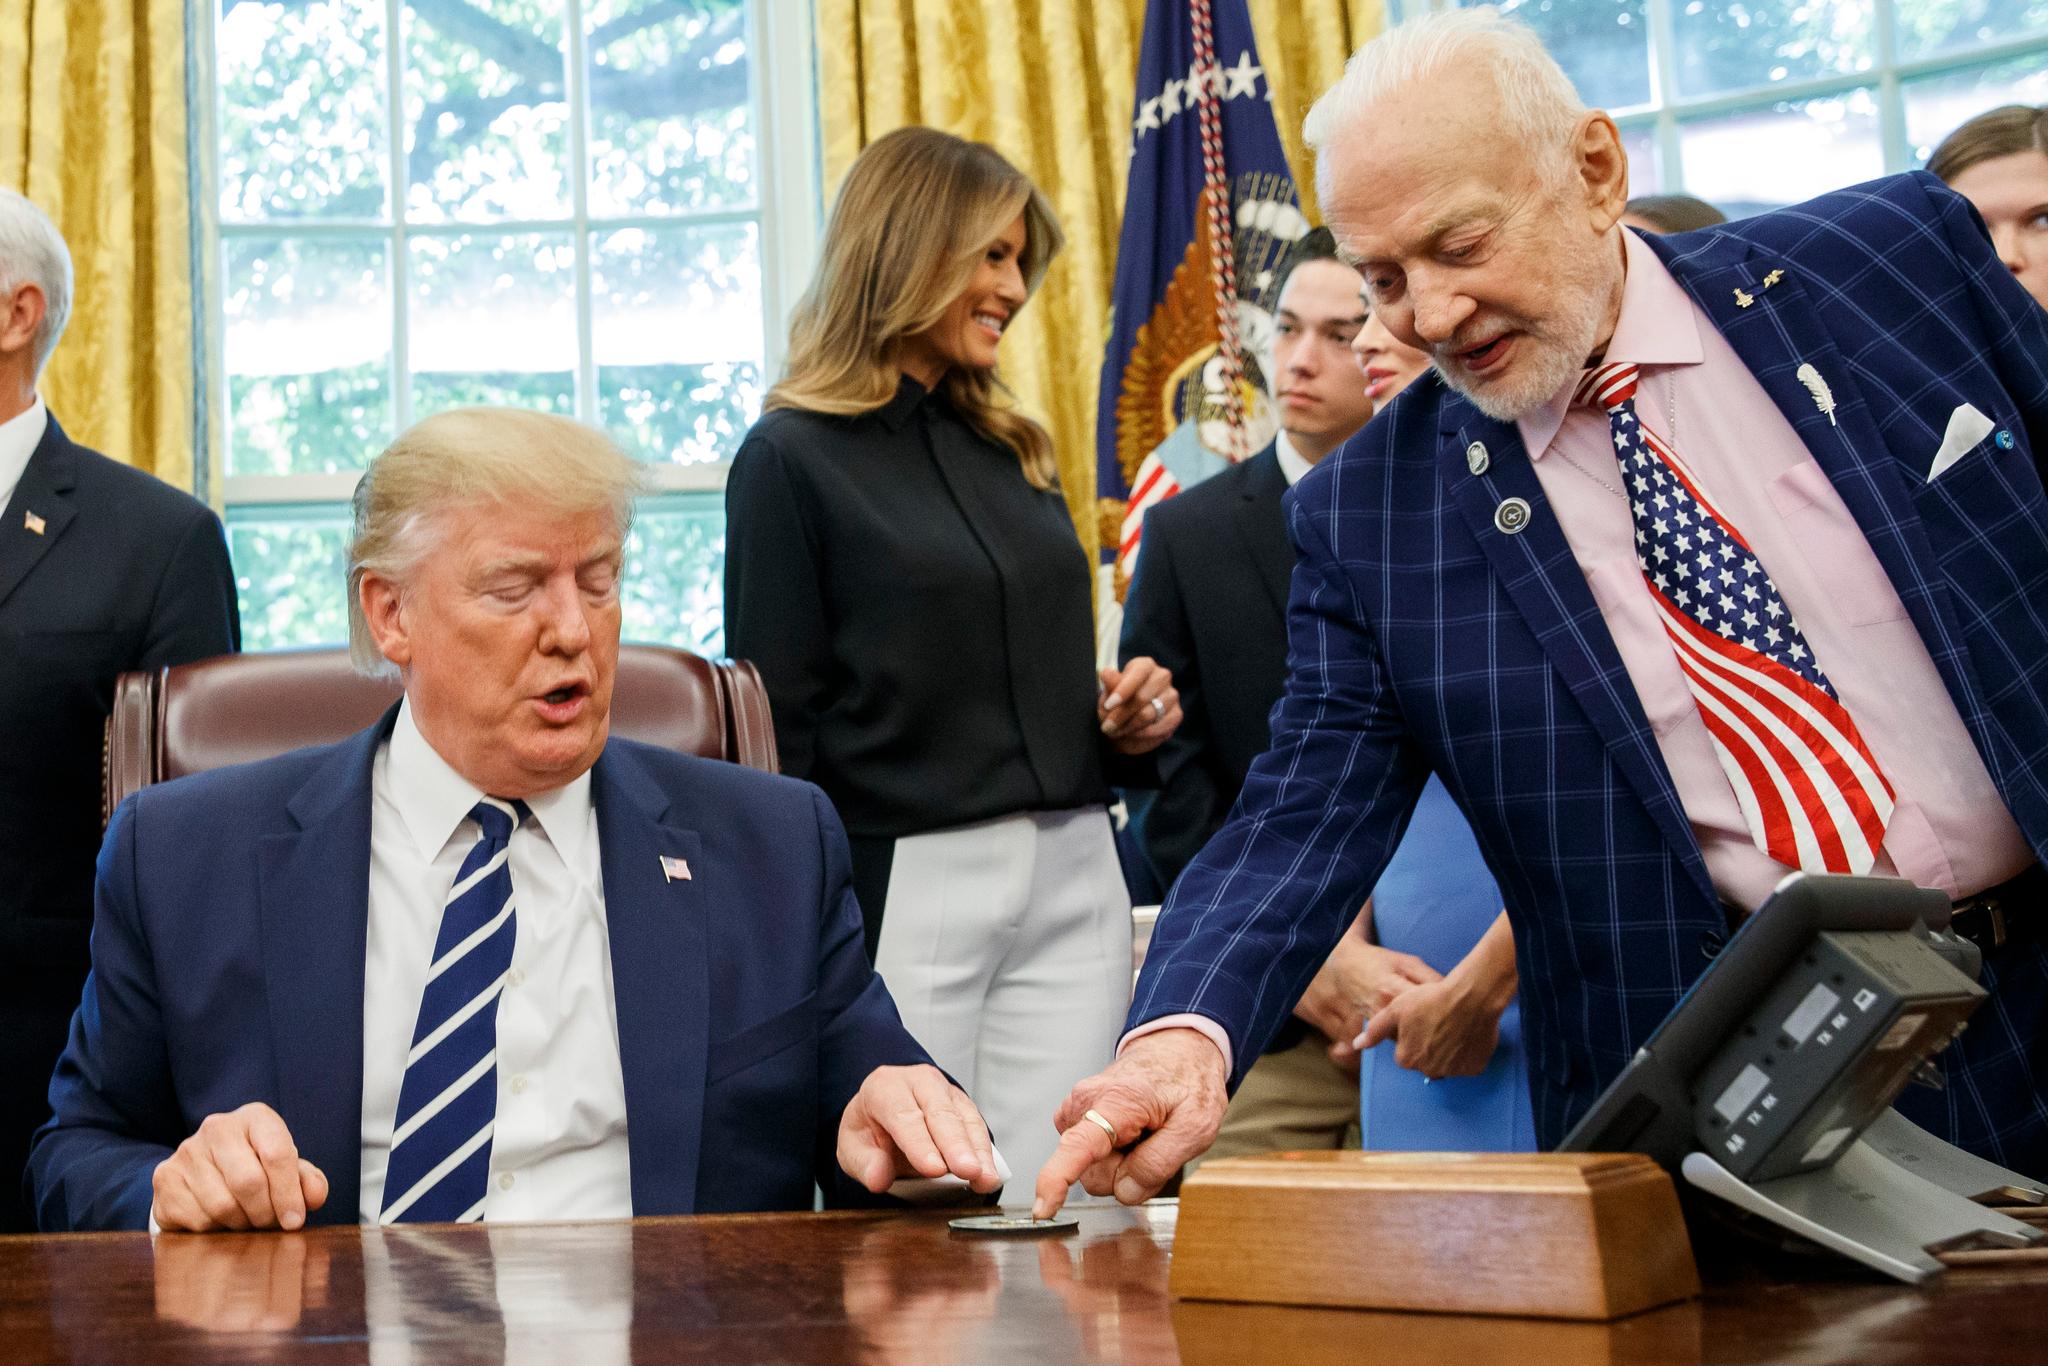 Apollo 11 astronauts Buzz Aldrin and Michael Collins visit Oval Office